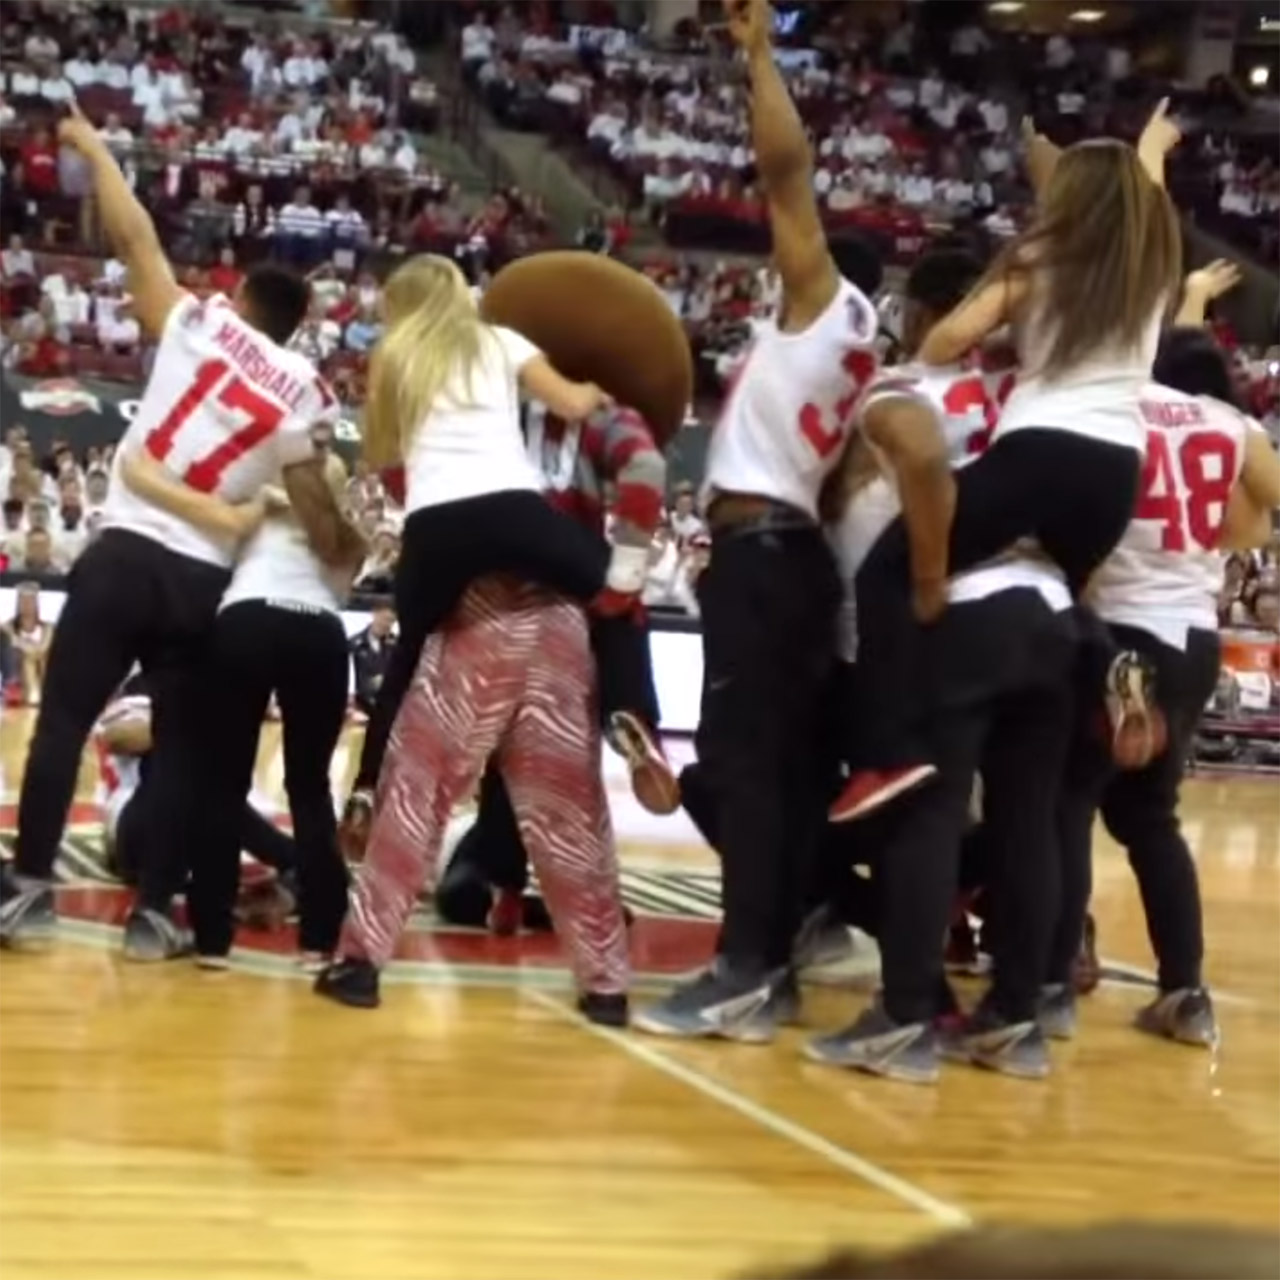 Buckeyes football team form dance crew for halftime entertainment at Ohio State basketball game